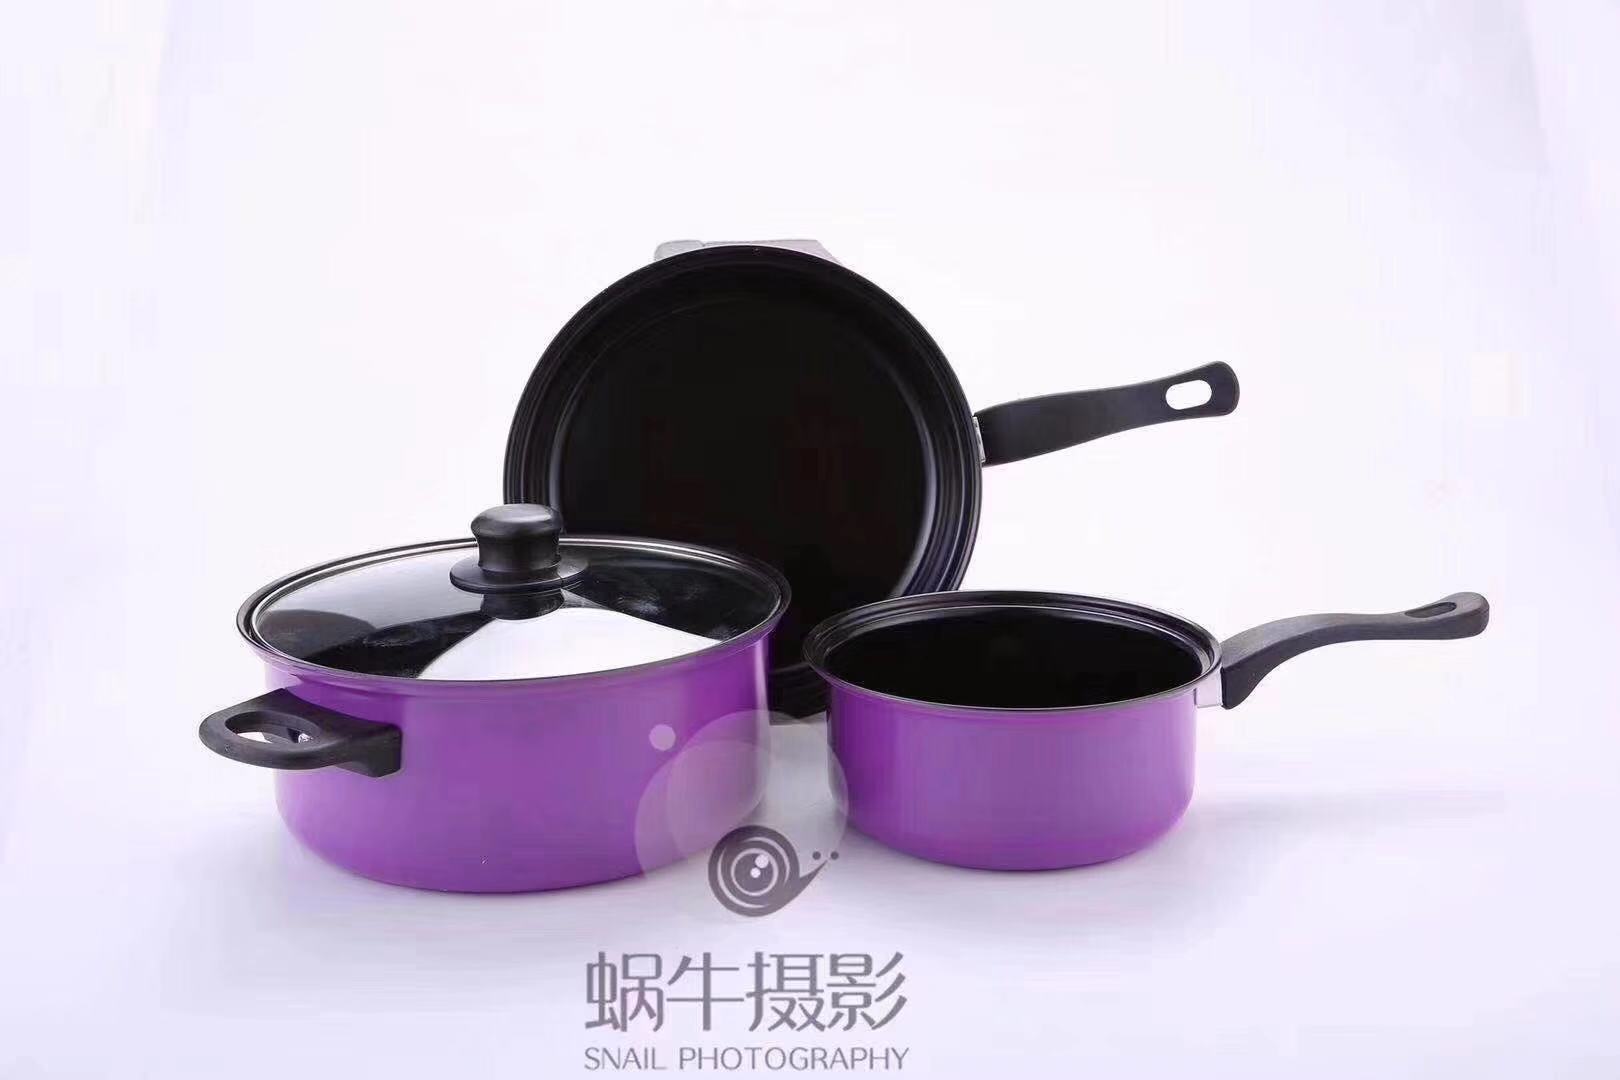 Colorful Non-Stick Three-Piece Set Best Luck Year by Year Three-Piece Flat Non-Stick Pan Pot Set Creative Activity Gift Pot